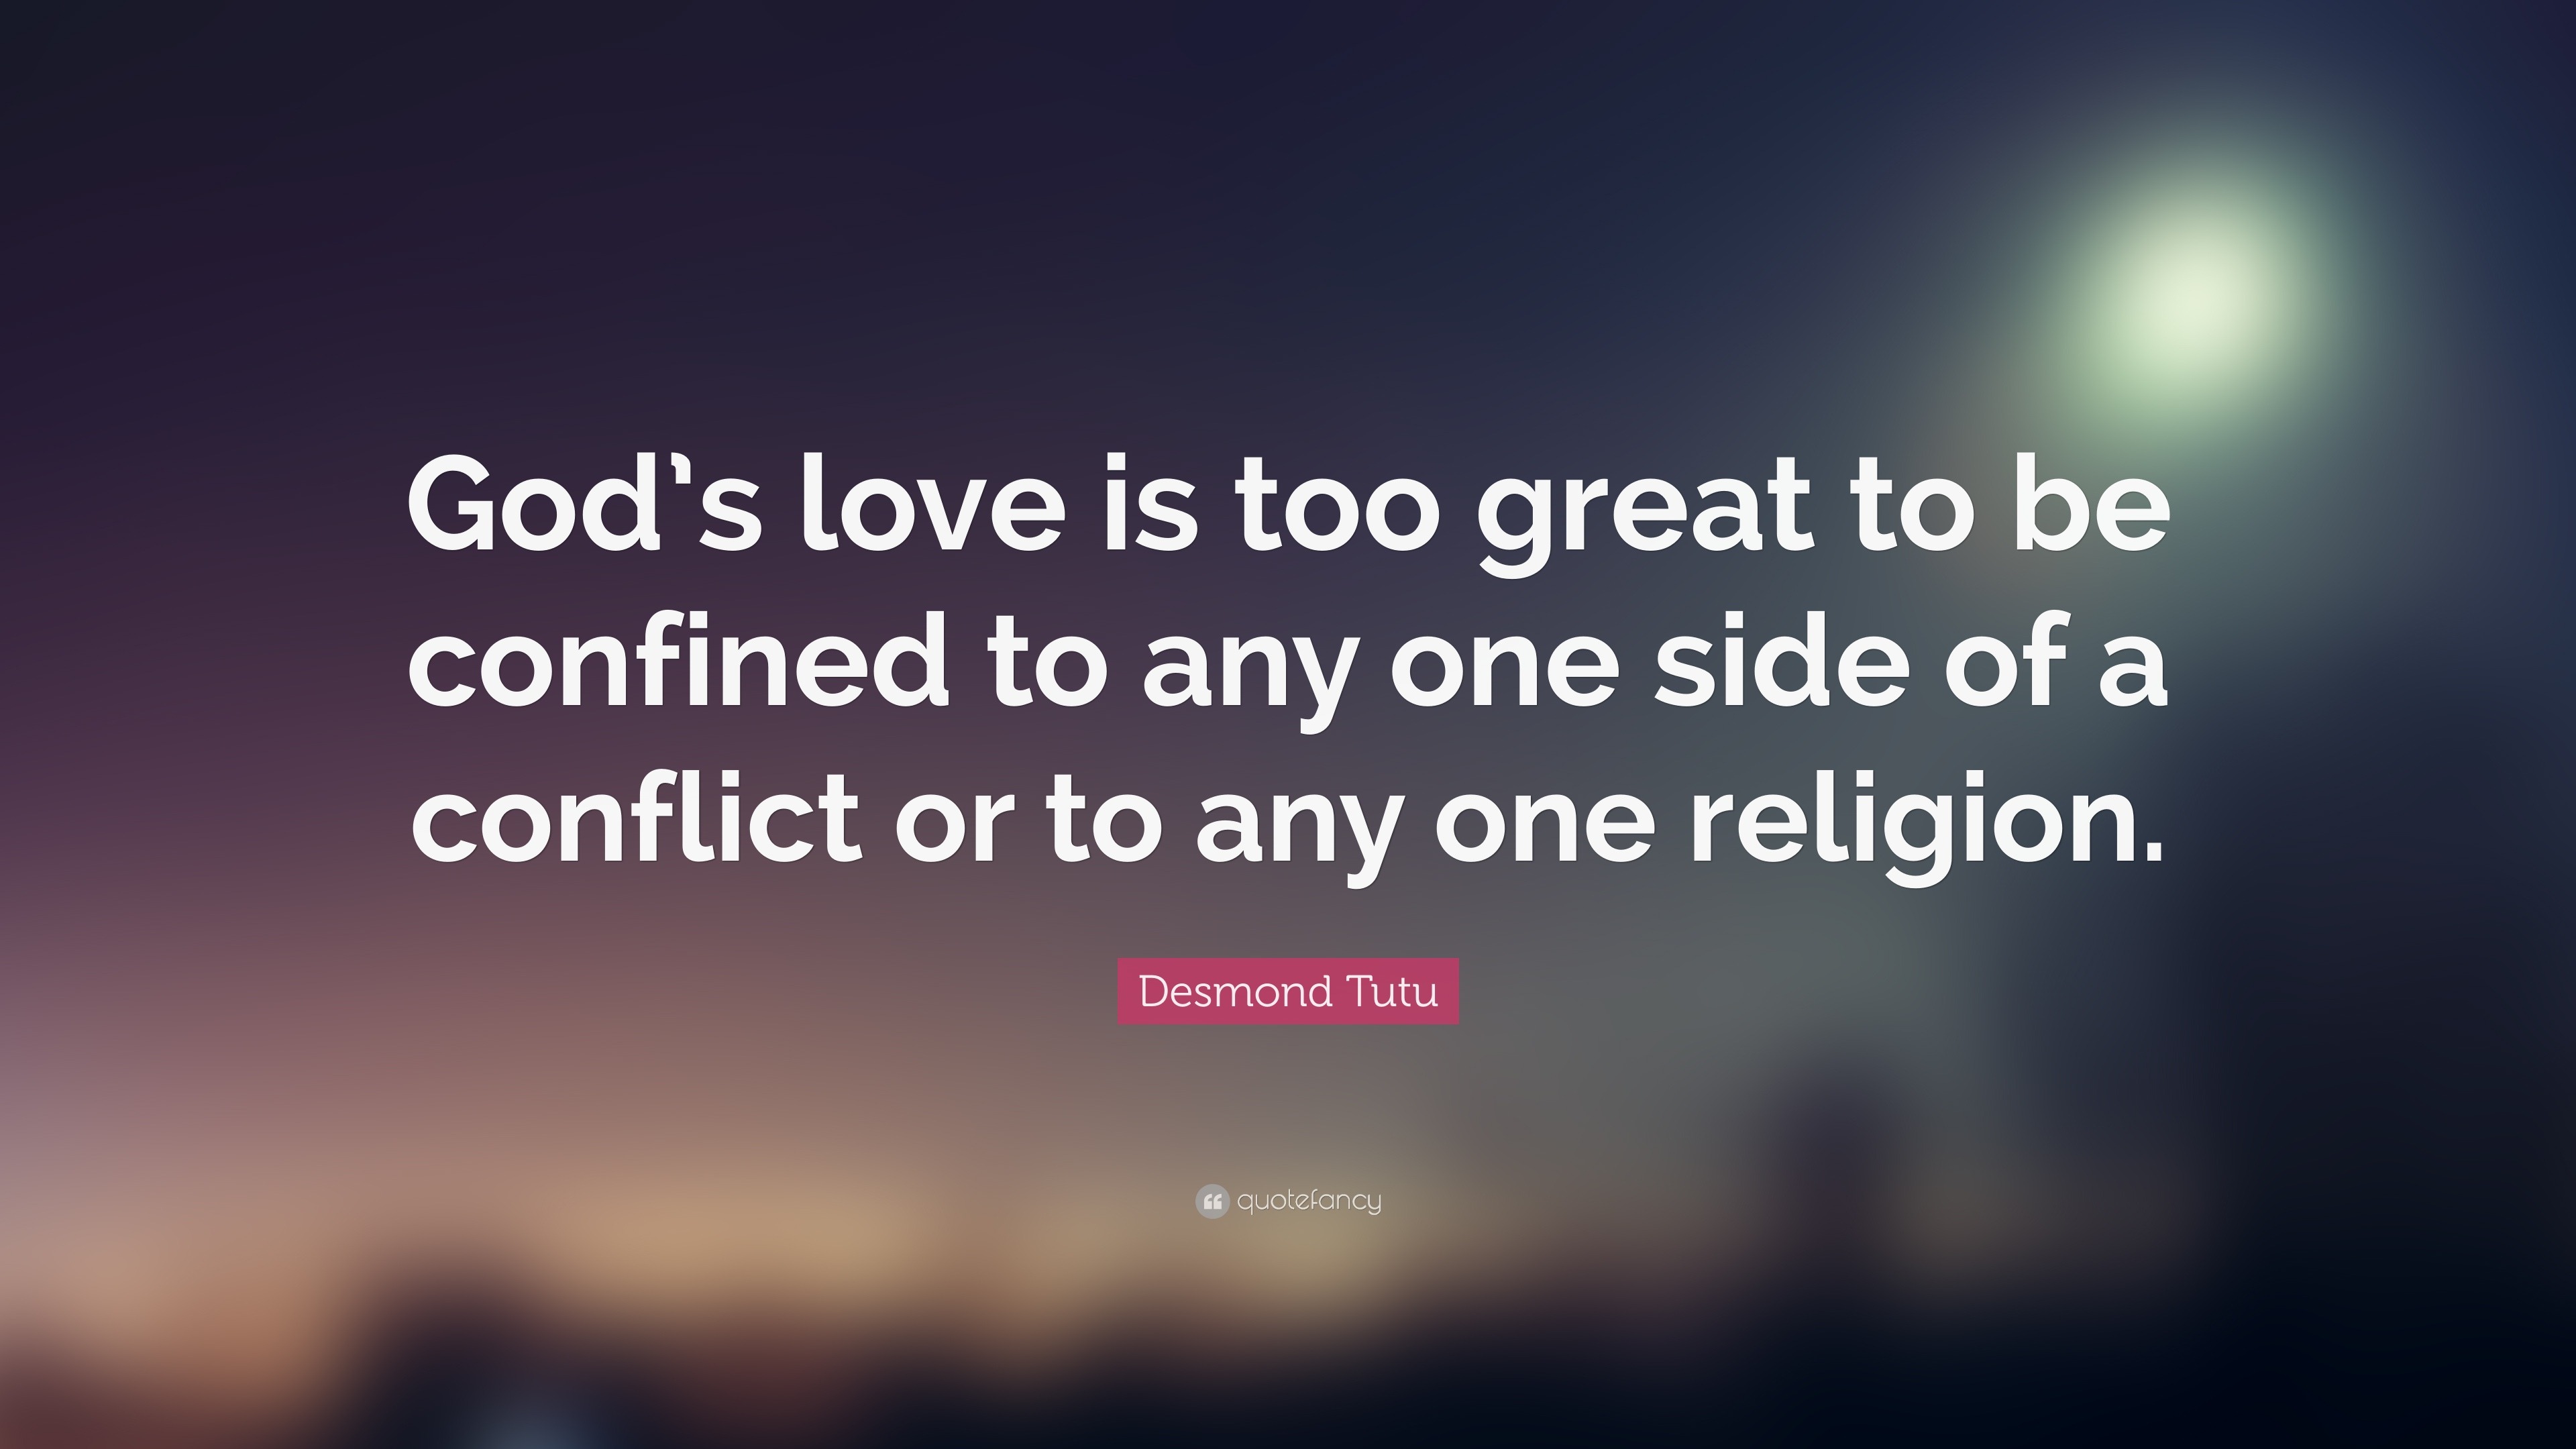 Desmond Tutu Quote “God s love is too great to be confined to any one